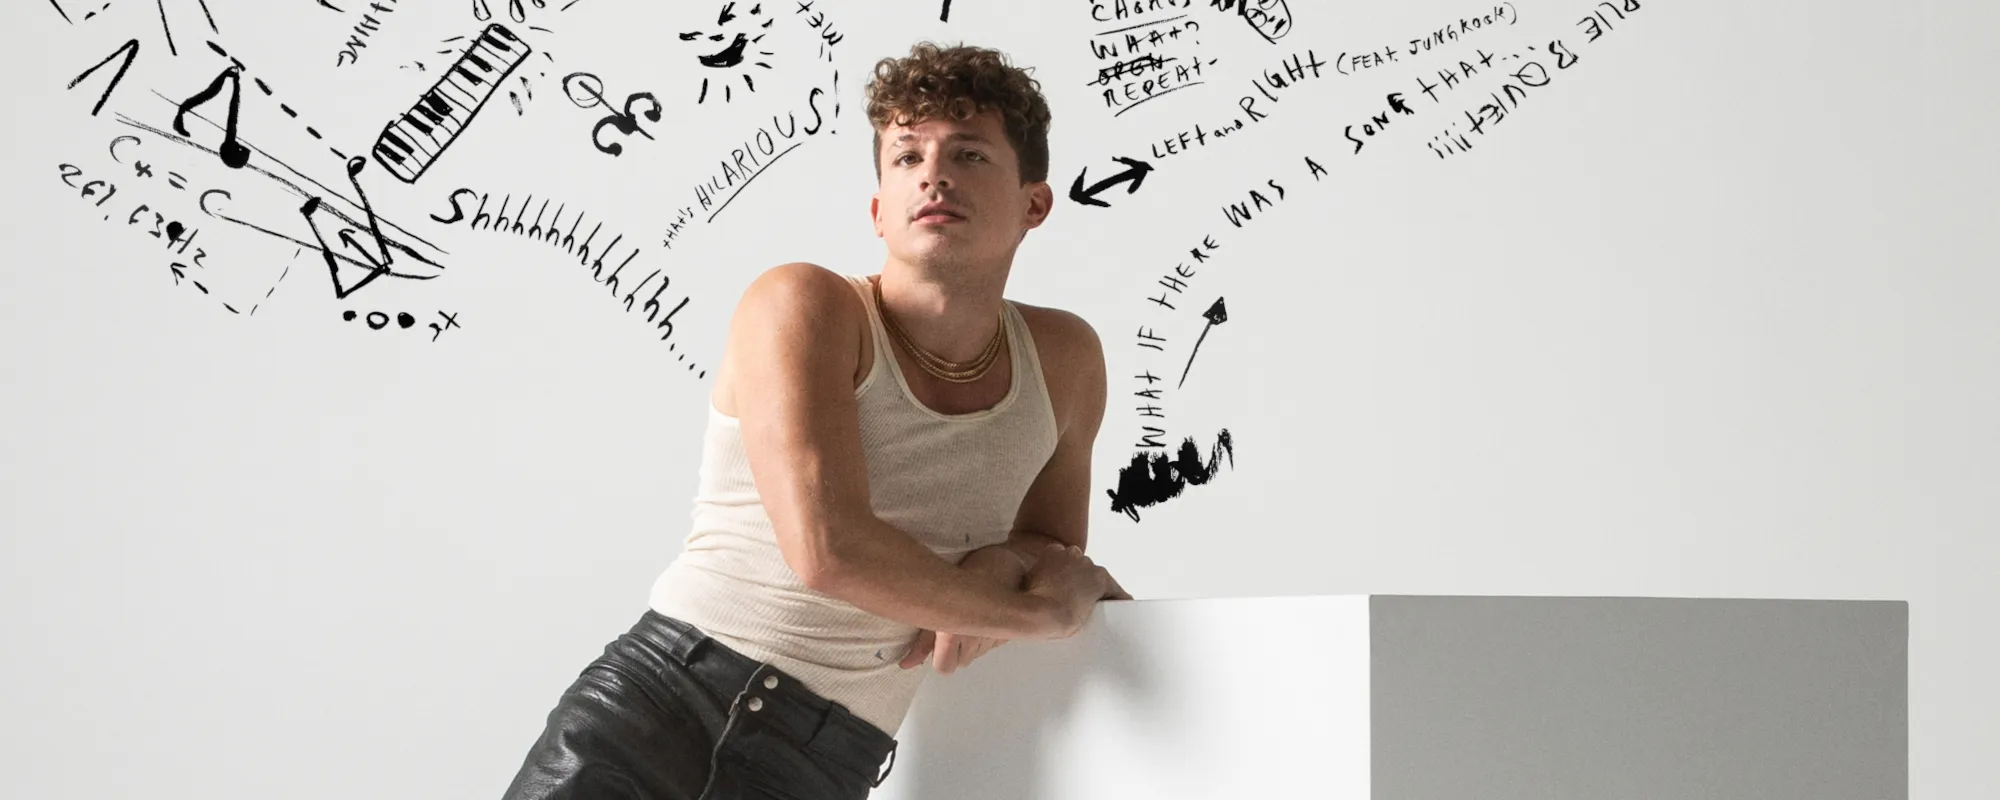 10 Songs You Didn’t Know Charlie Puth Wrote for Other Artists